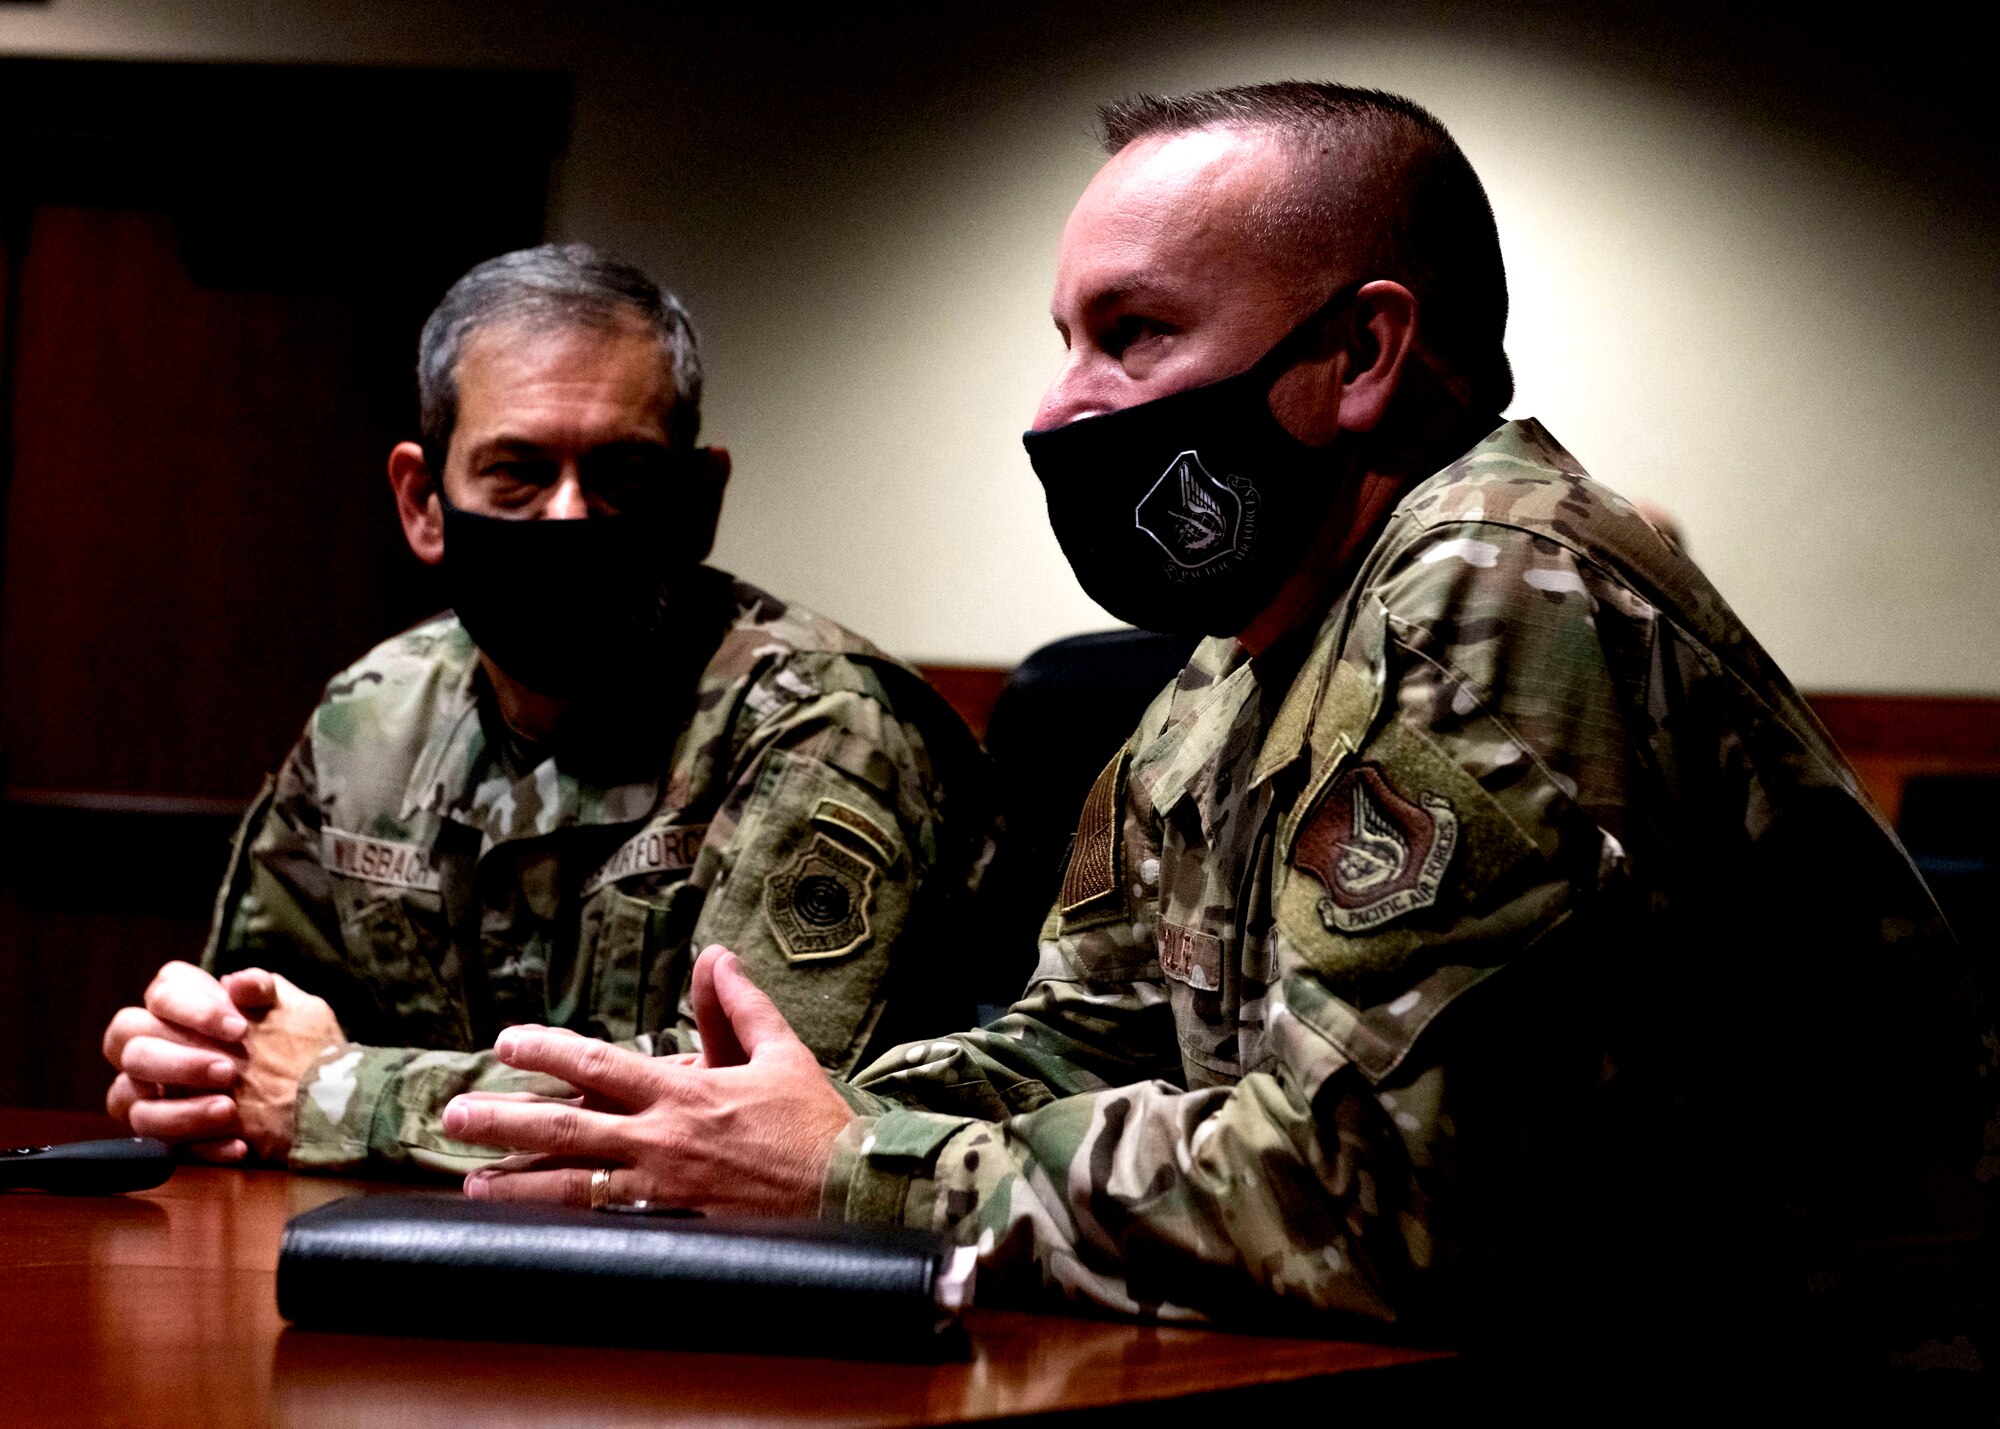 U.S. Air Force Chief Master Sgt. David Wolfe, the Pacific Air Forces command chief, right, and U.S. Air Force Gen. Kenneth Wilsbach, left, the Pacific Air Forces commander, talk to the 673d Air Base Wing and 3rd Wing during a virtual all-call at Joint Base Elmendorf-Richardson, Alaska, Feb. 18, 2021. PACAF leadership conducted an immersion tour of JBER to learn about the installation's role in readiness and defense in the Arctic as well as how the base remains poised for the future through innovative ideas.